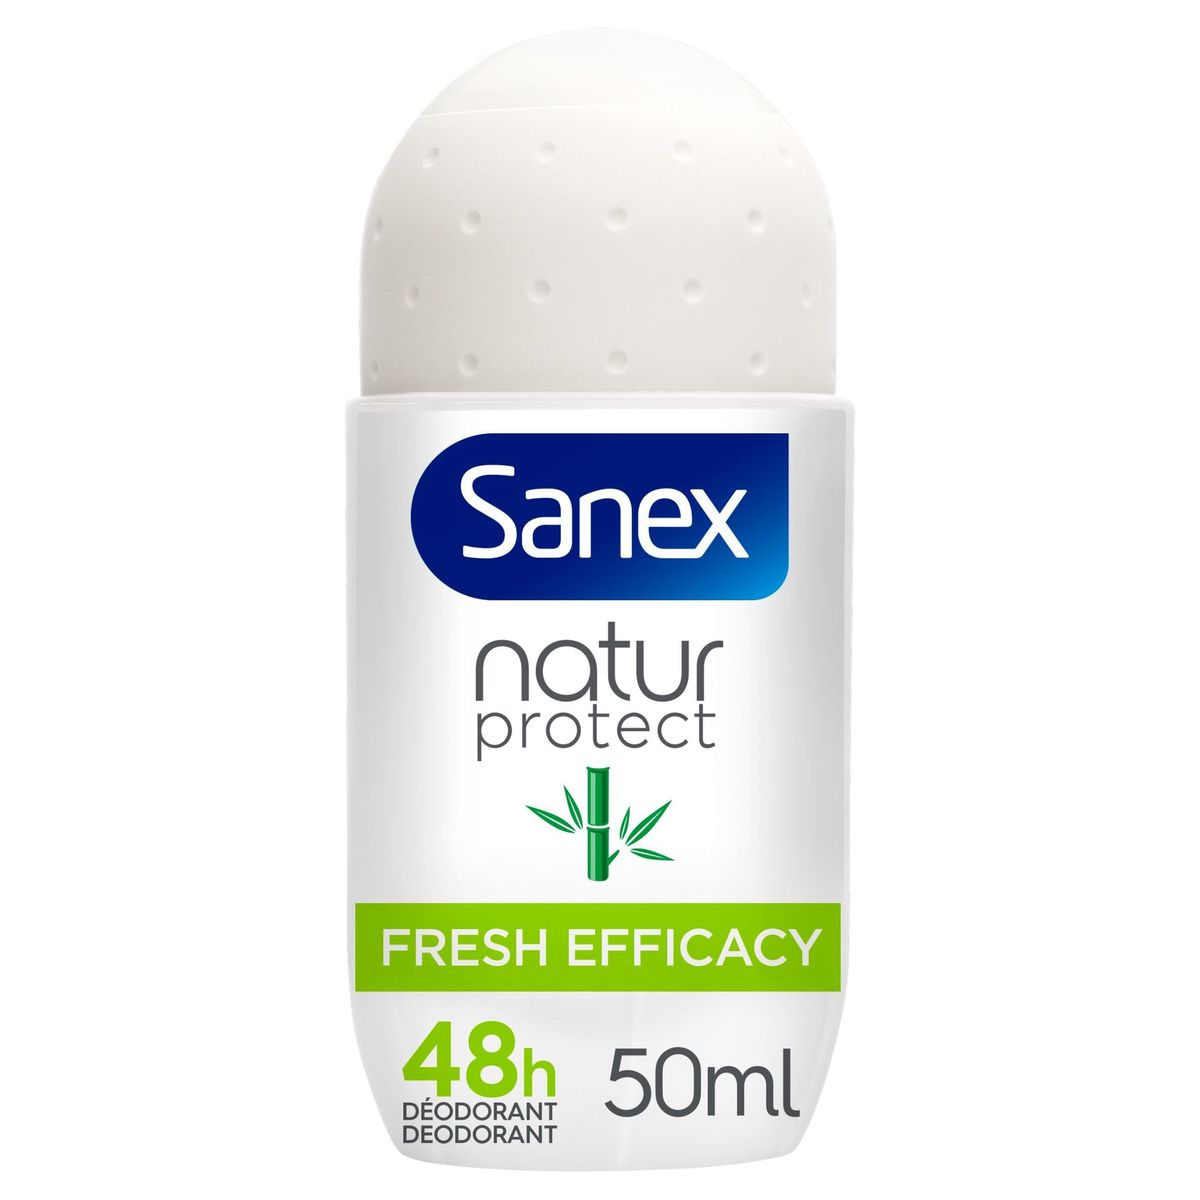 Sanex deodorant Naturprotect natural Bamboo efficacy roll-on 50ml